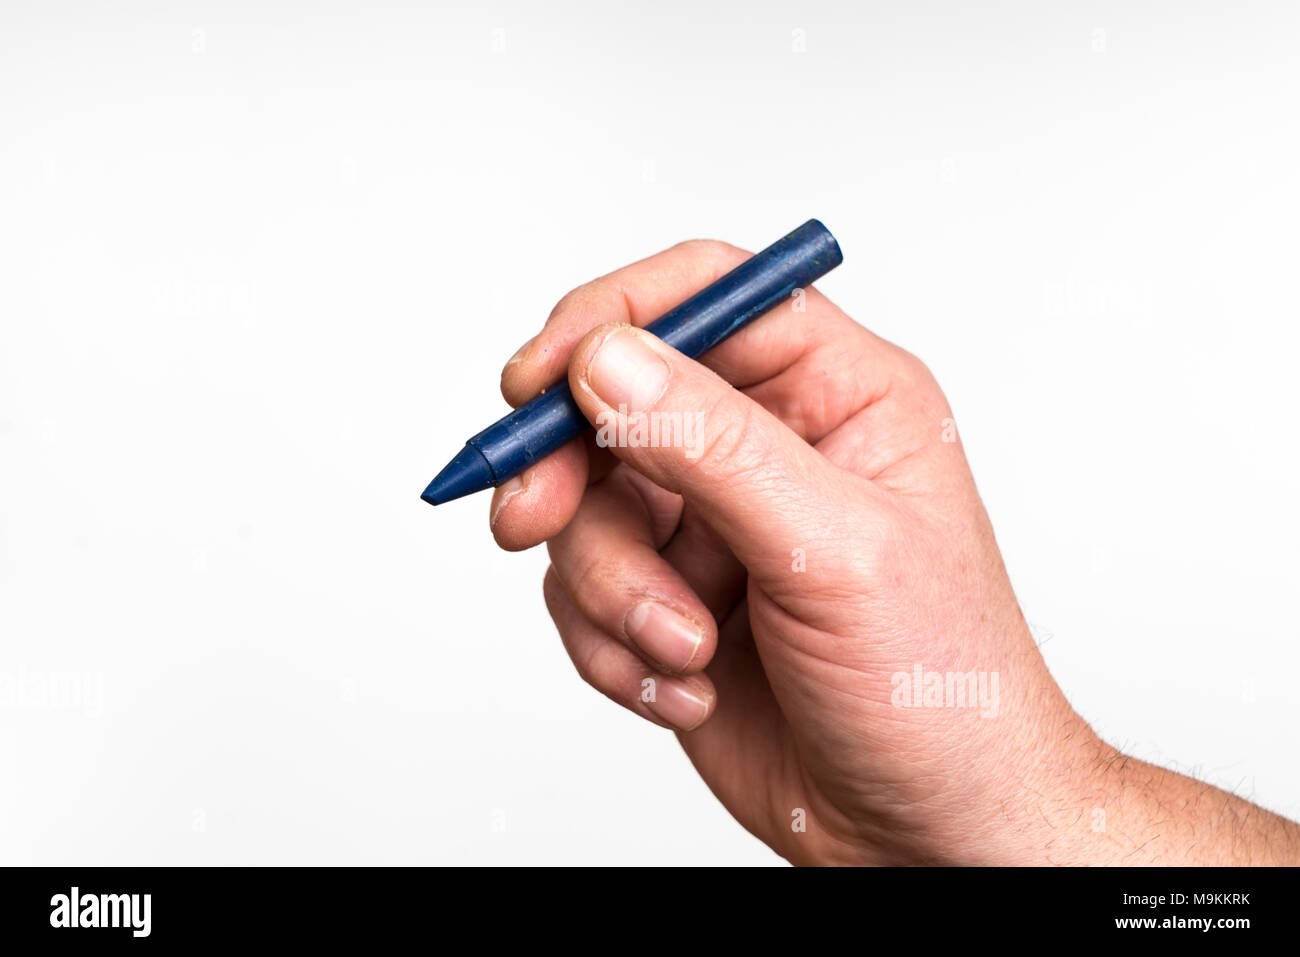 A blue wax crayon in the hand Stock Photo